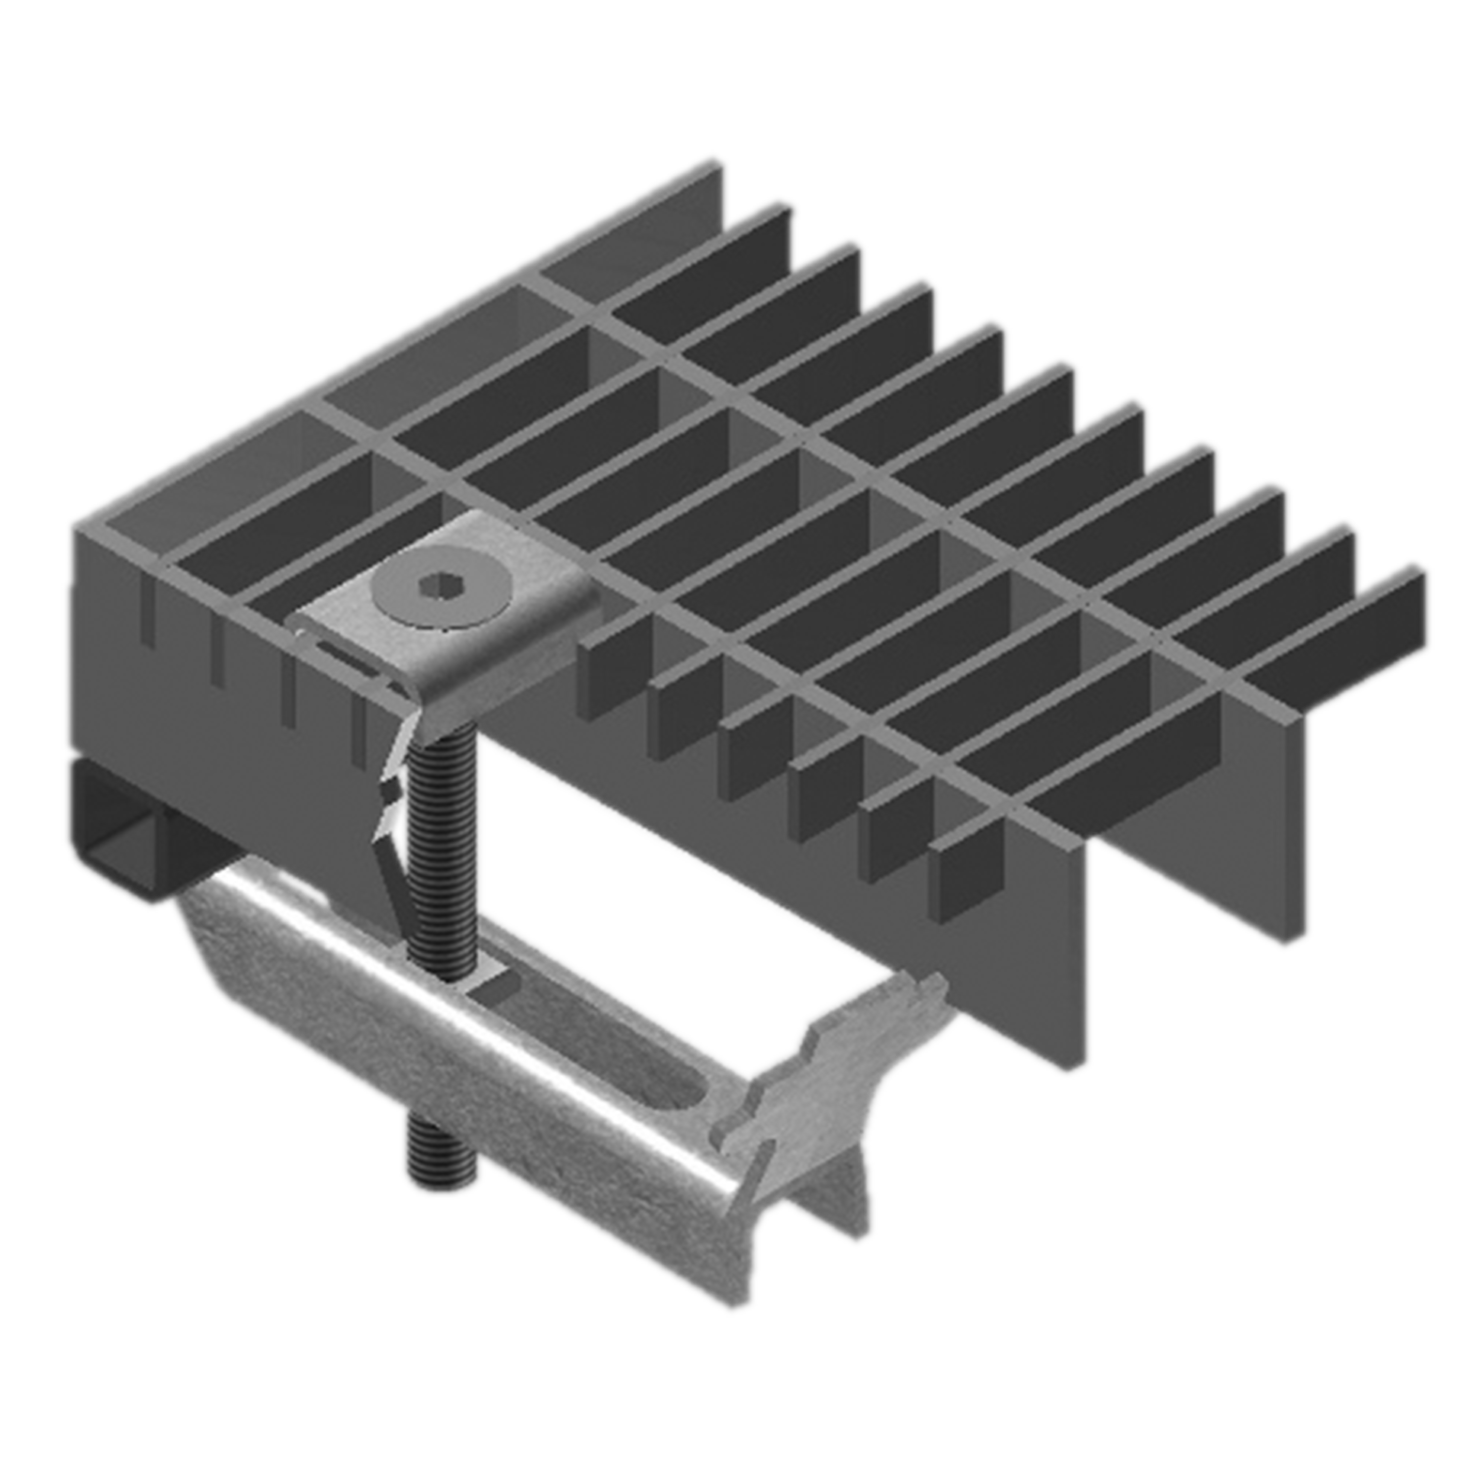 Attachments for gratings